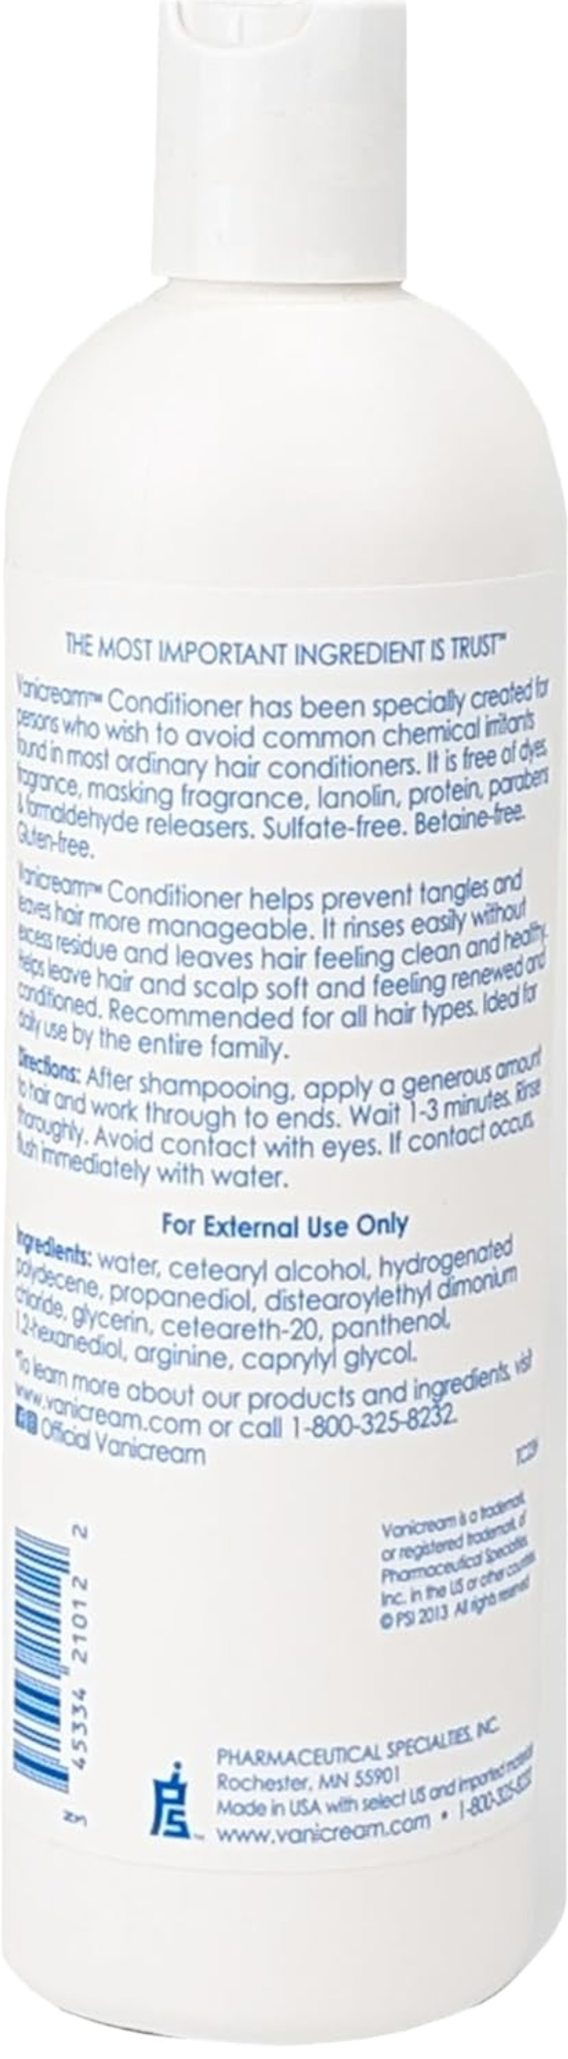 Vanicream HAIR CONDITIONER for SENSITIVE SKIN 12 fl oz 355g - Supporting ORCRF.org